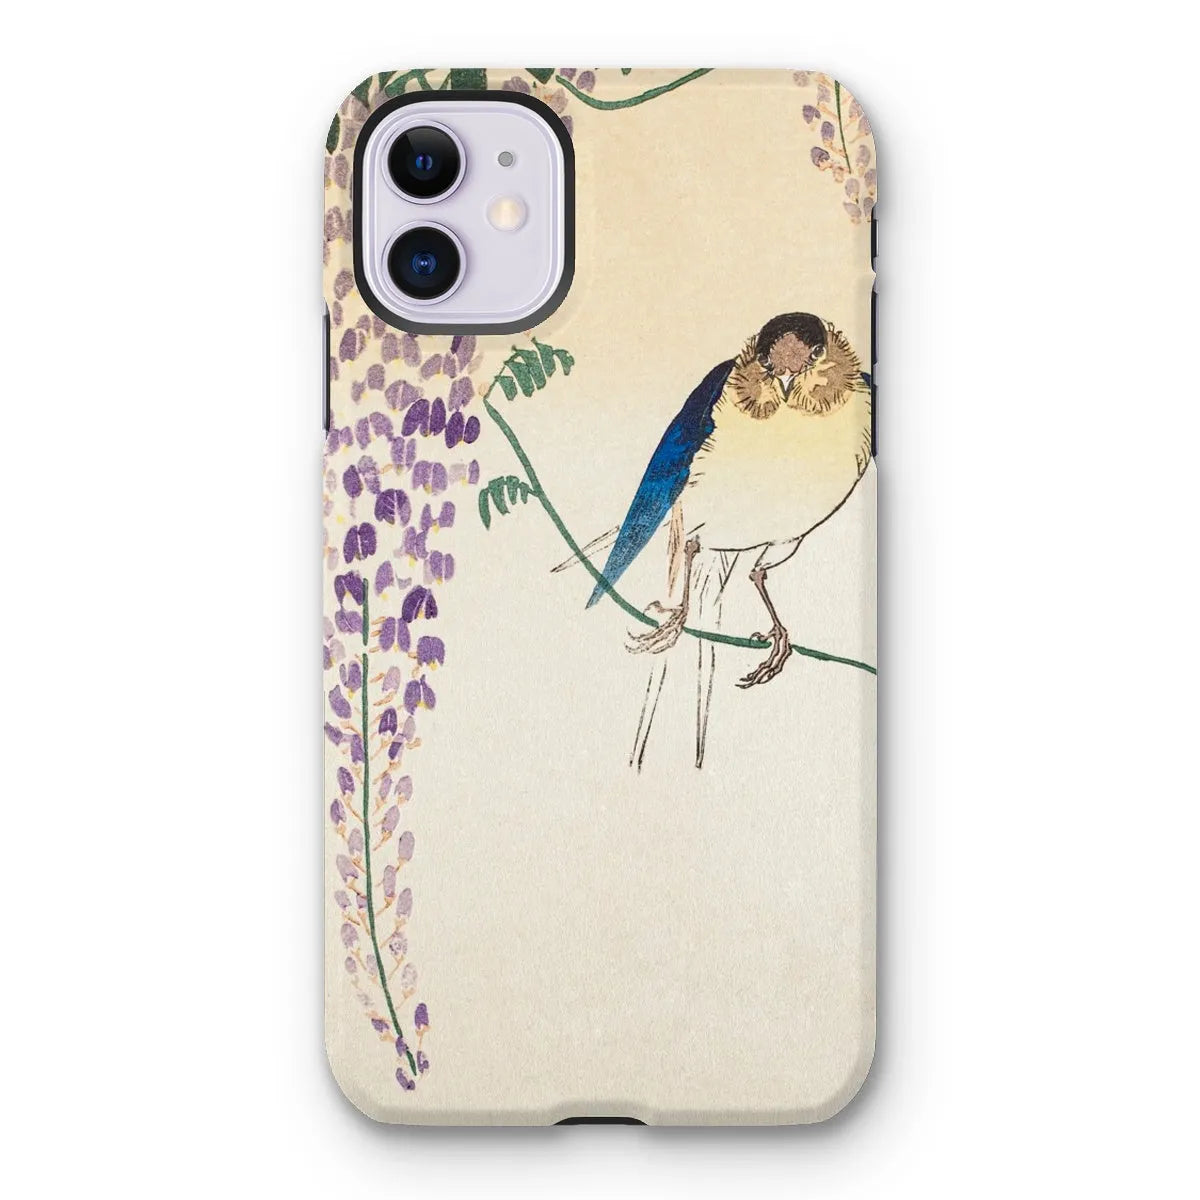 Wisteria And Swallow - Japanese Art Phone Case - Ohara Koson - Iphone 11 / Matte - Mobile Phone Cases - Aesthetic Art